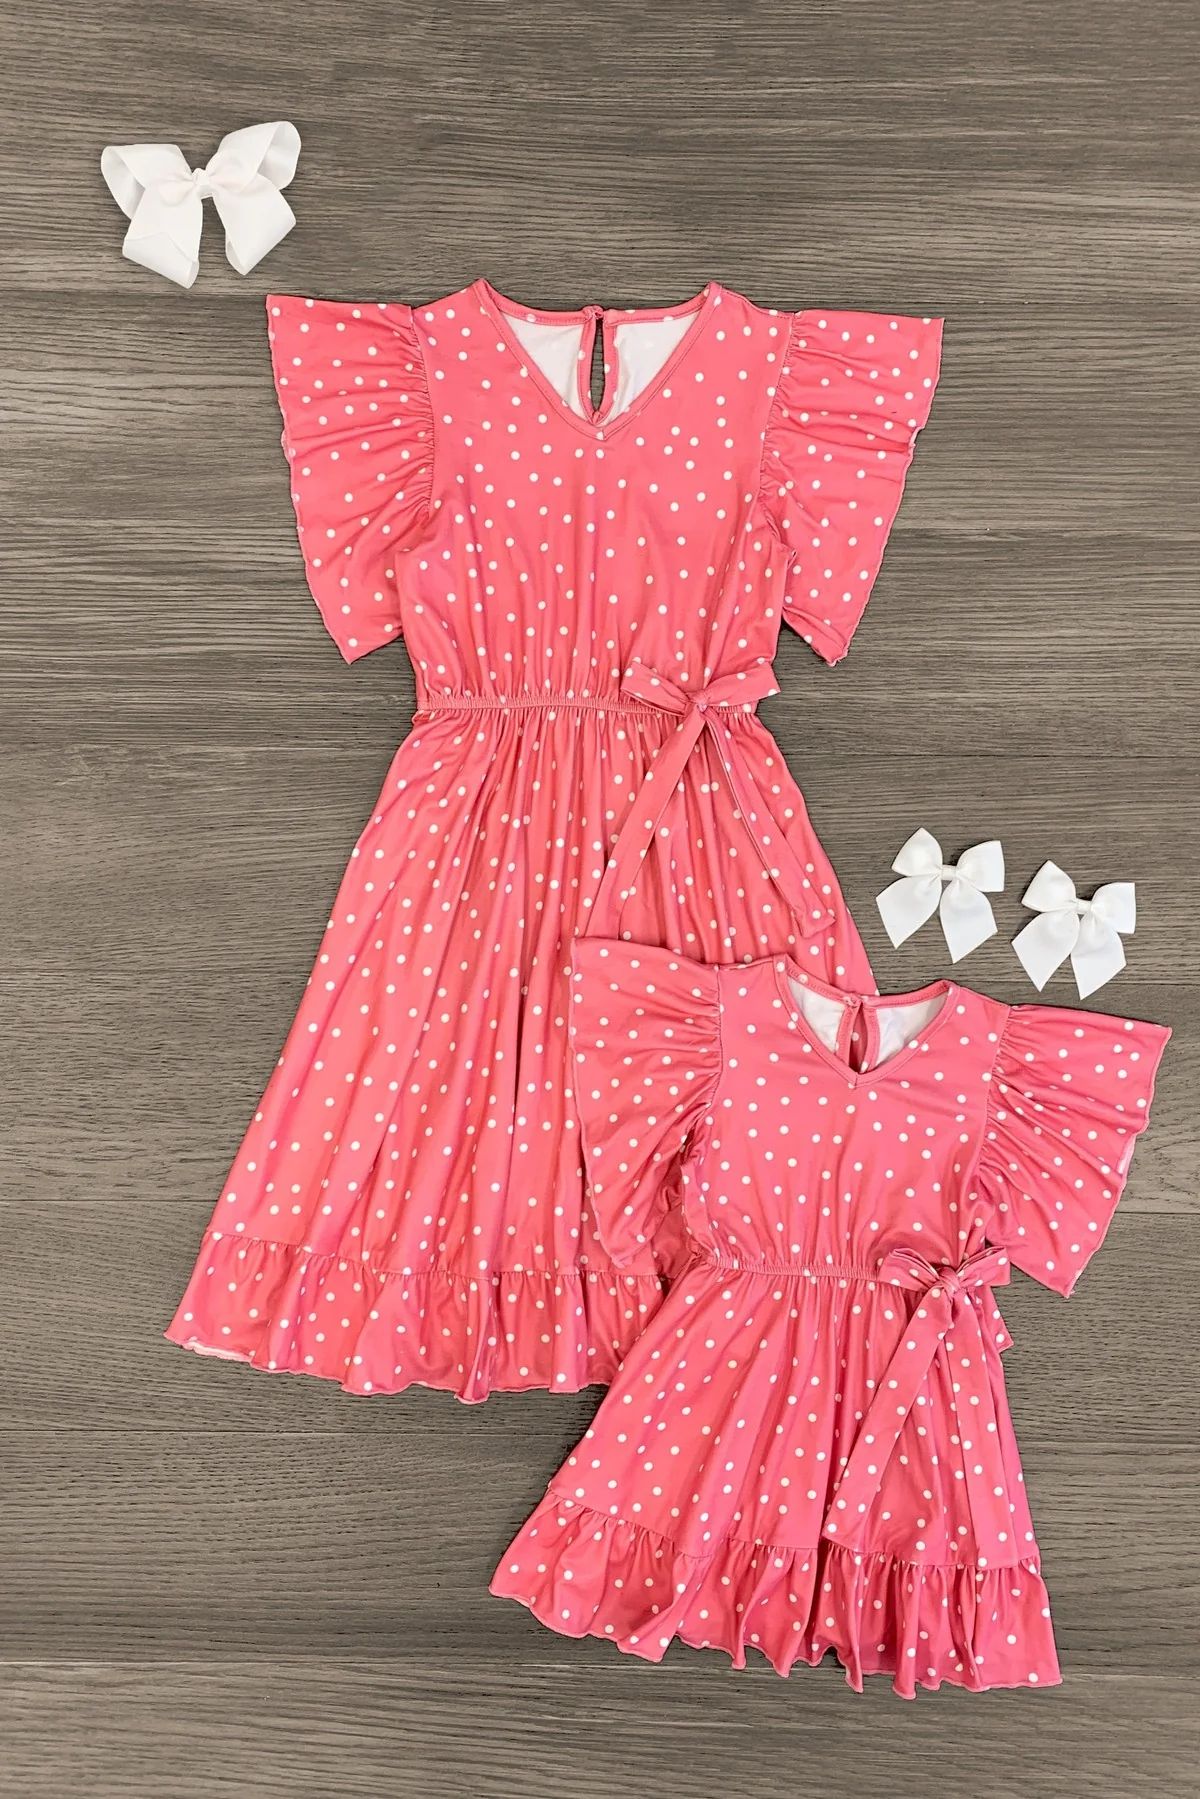 Mom & Me - Pink Polka Dot Ruffle Dress | Sparkle In Pink